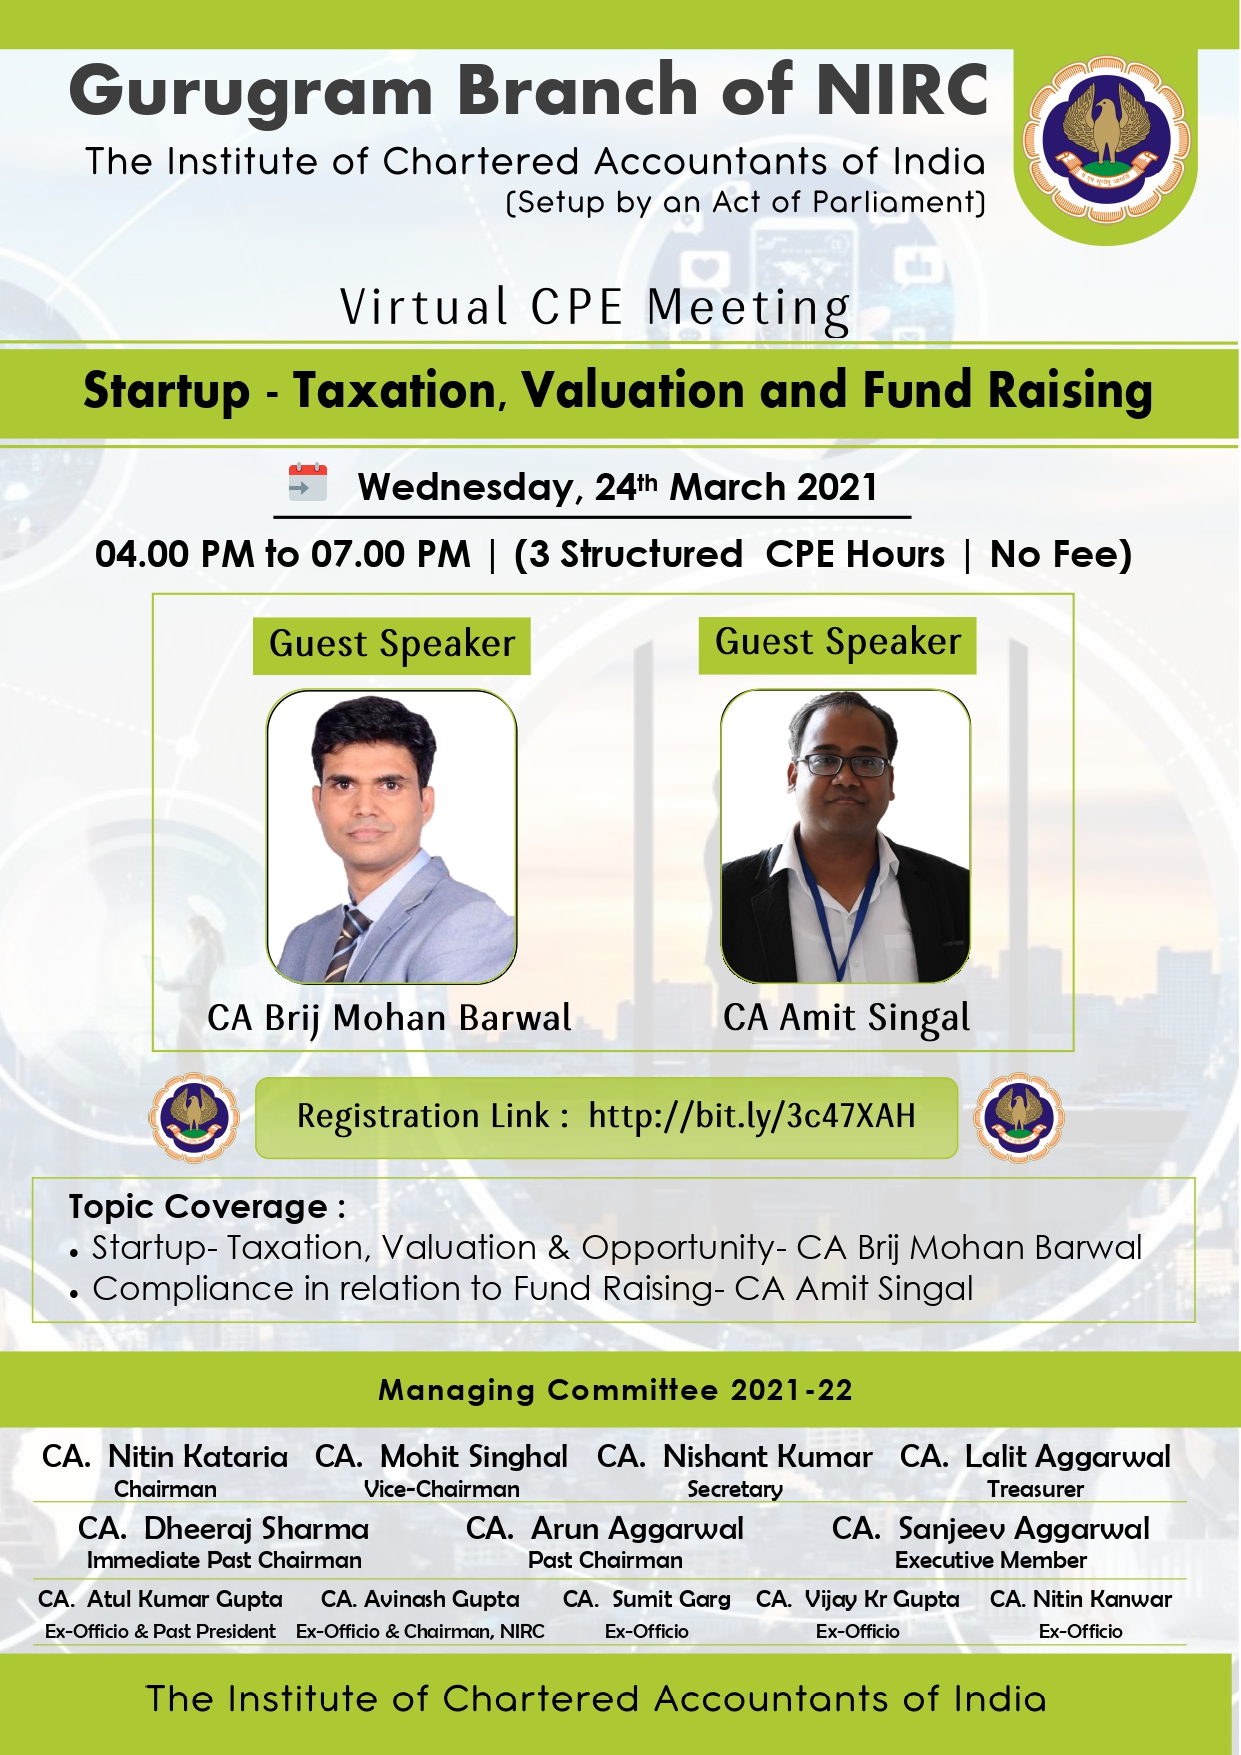 Virtual CPE Meeting on Startup - Taxation, Valuation and Fund Raising